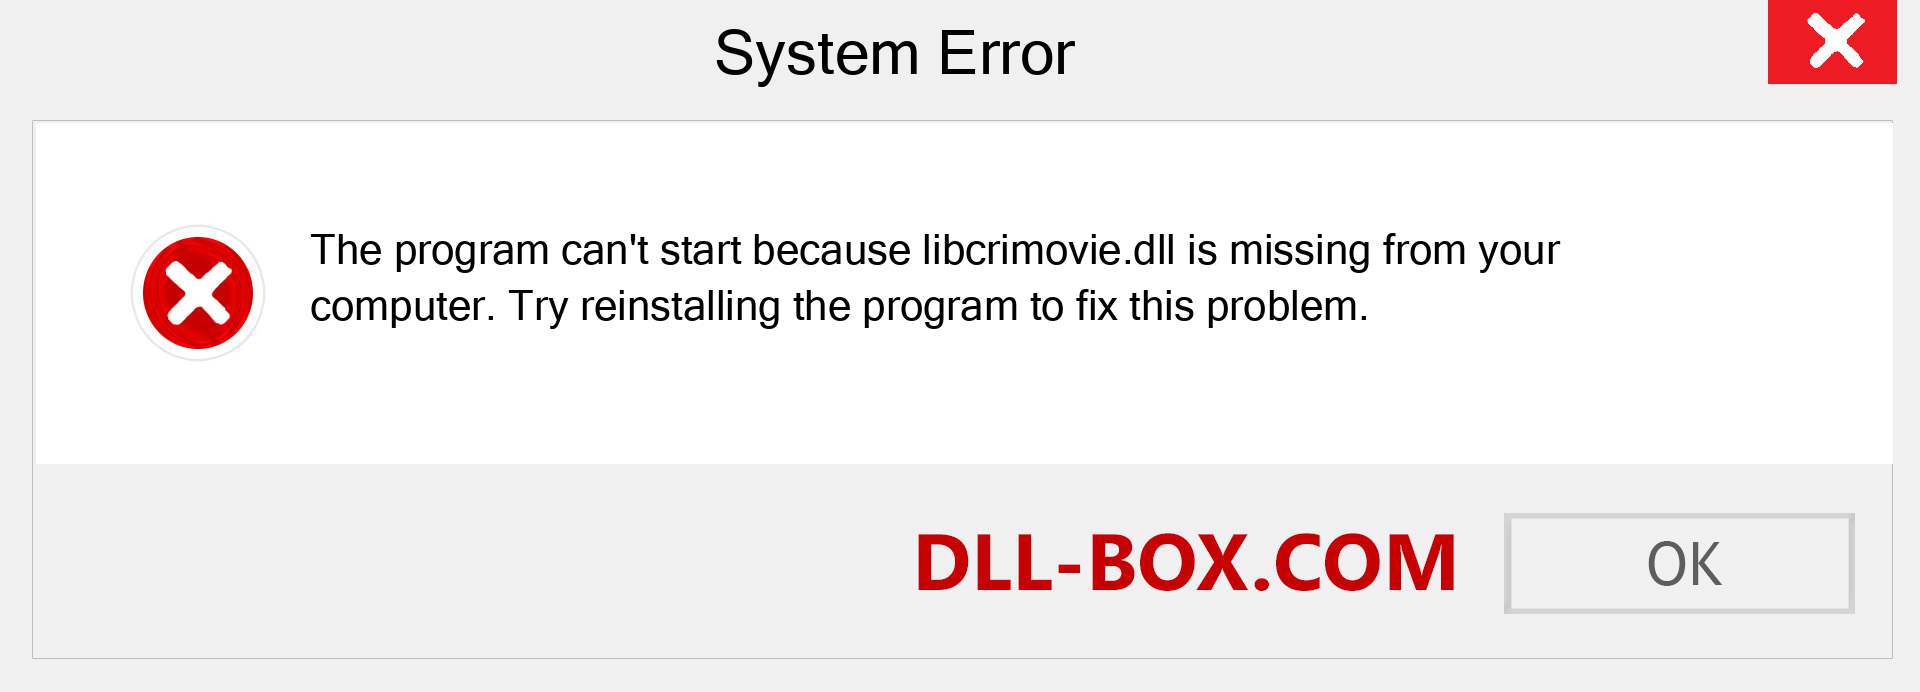  libcrimovie.dll file is missing?. Download for Windows 7, 8, 10 - Fix  libcrimovie dll Missing Error on Windows, photos, images